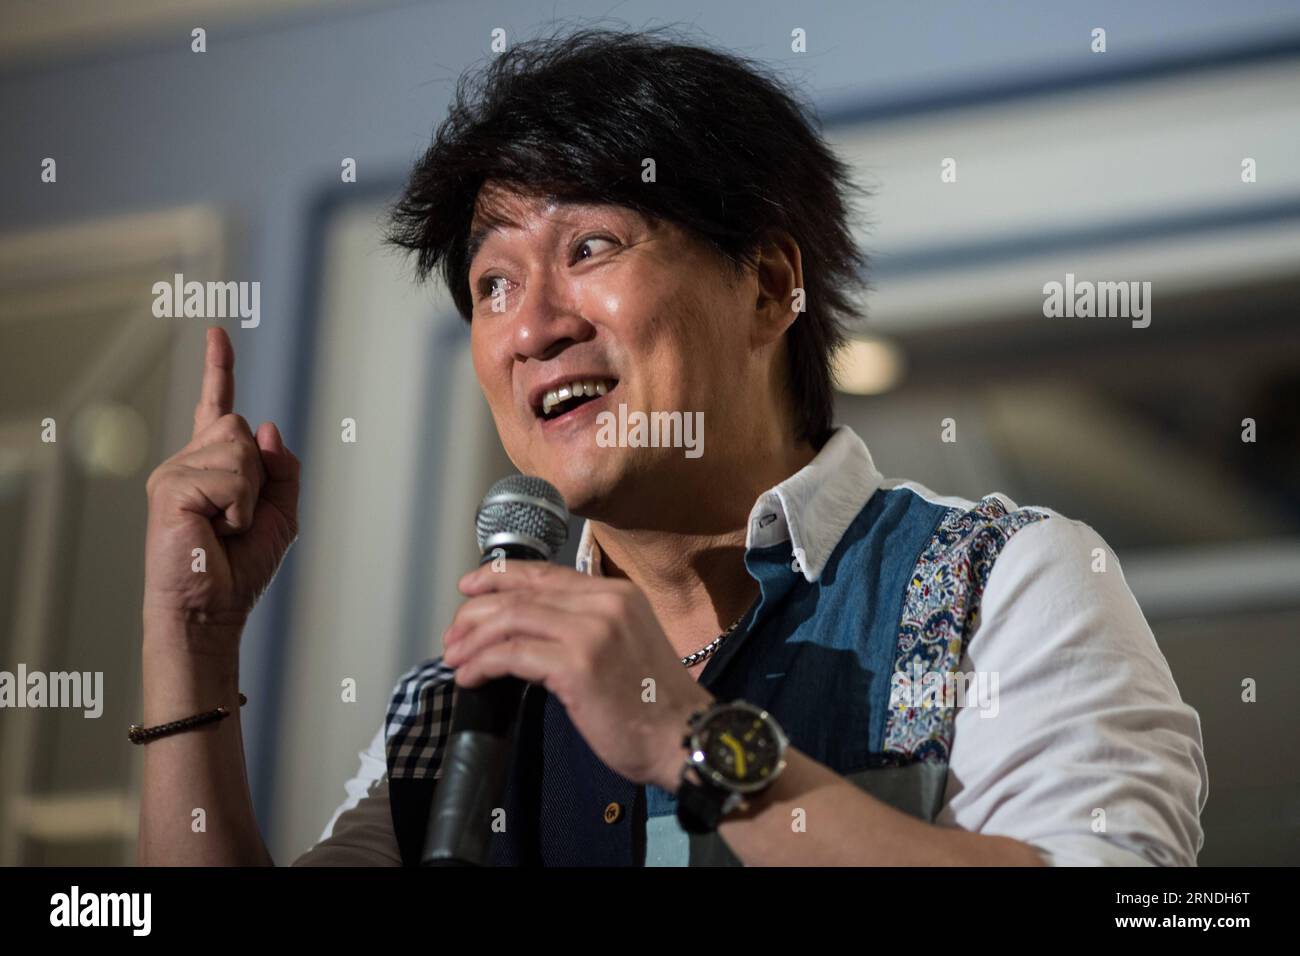 (160520) -- NEW YORK, May 20, 2016 -- Singer Emil Wakin Chau speaks during a press conference for his upcoming concert What we are going to sing today in New York, the United States on May 20, 2016. Emil Wakin Chau will hold his personal concert What we are going to sing today at Lincoln Center in New York on May 22. ) U.S.-NEW YORK-WAKIN CHAU-CONCERT-PRESS CONFERENCE LixMuzi PUBLICATIONxNOTxINxCHN   160520 New York May 20 2016 Singer Emil Wakin Chau Speaks during a Press Conference for His upcoming Concert What We are Going to Sing Today in New York The United States ON May 20 2016 Emil Wakin Stock Photo